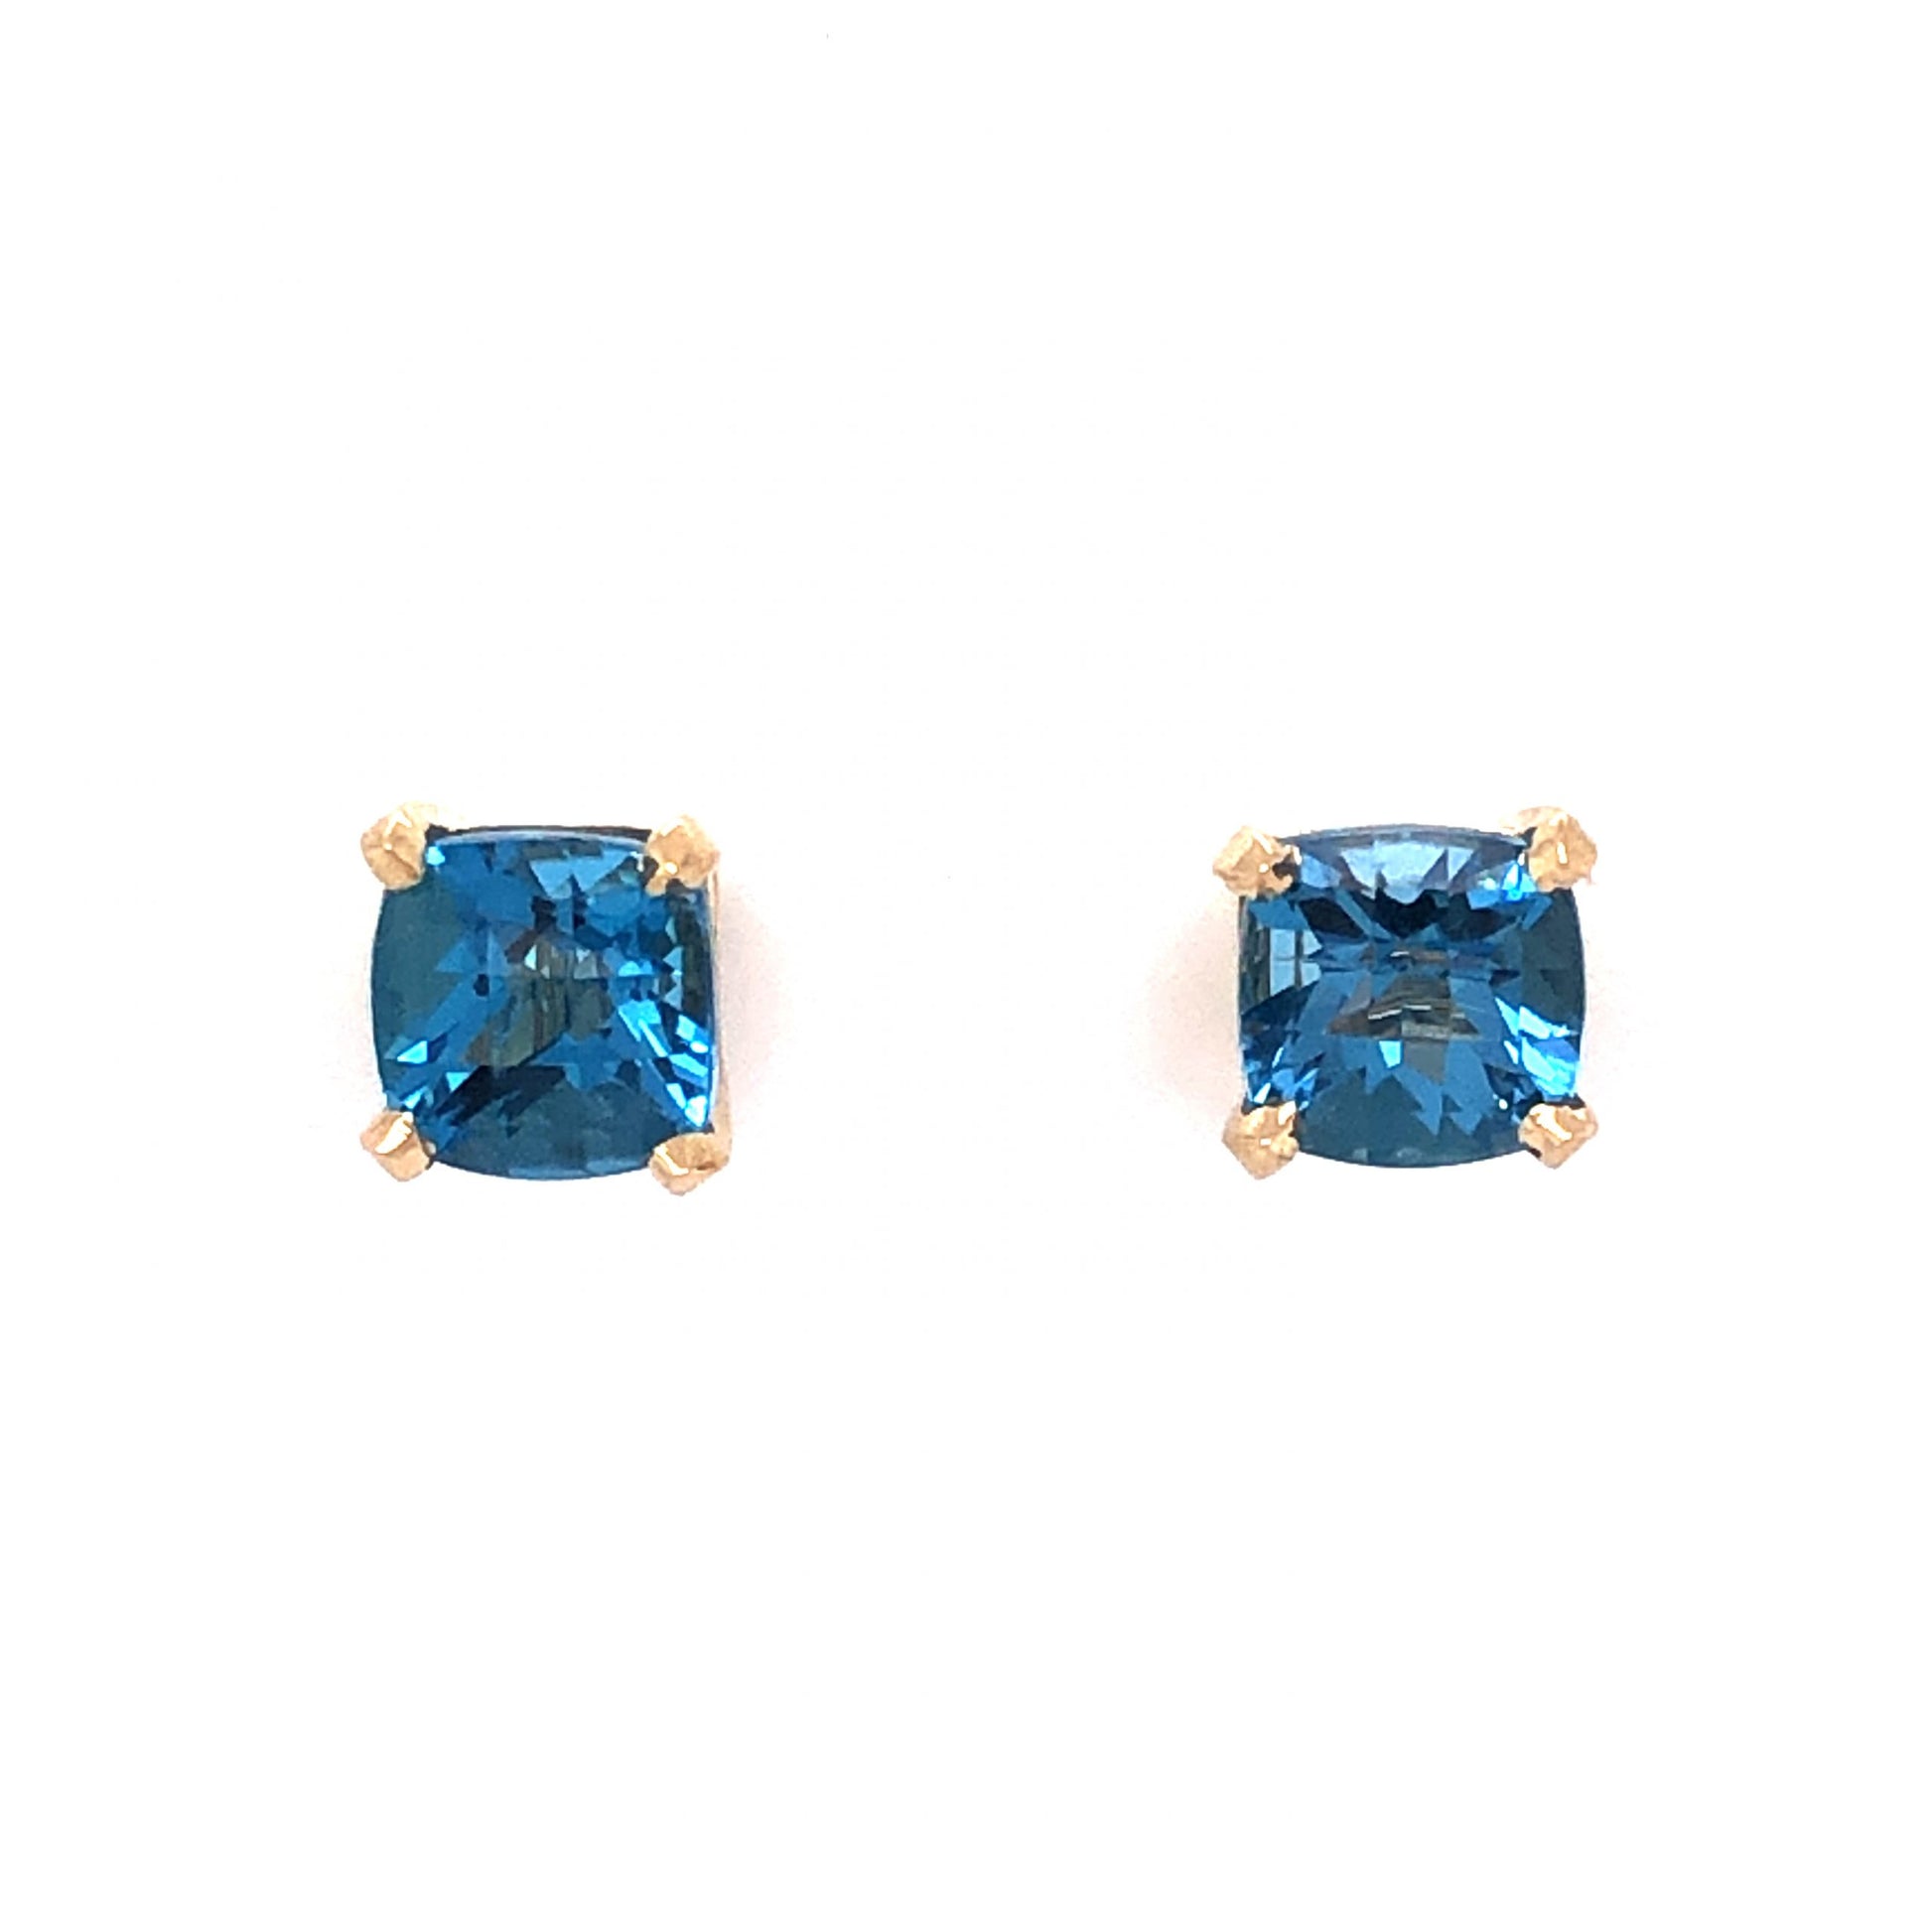 Checkerboard Faceted Blue Topaz Stud Earrings in 14k Yellow GoldComposition: Platinum Total Gram Weight: 3.1 g Inscription: 14k
      